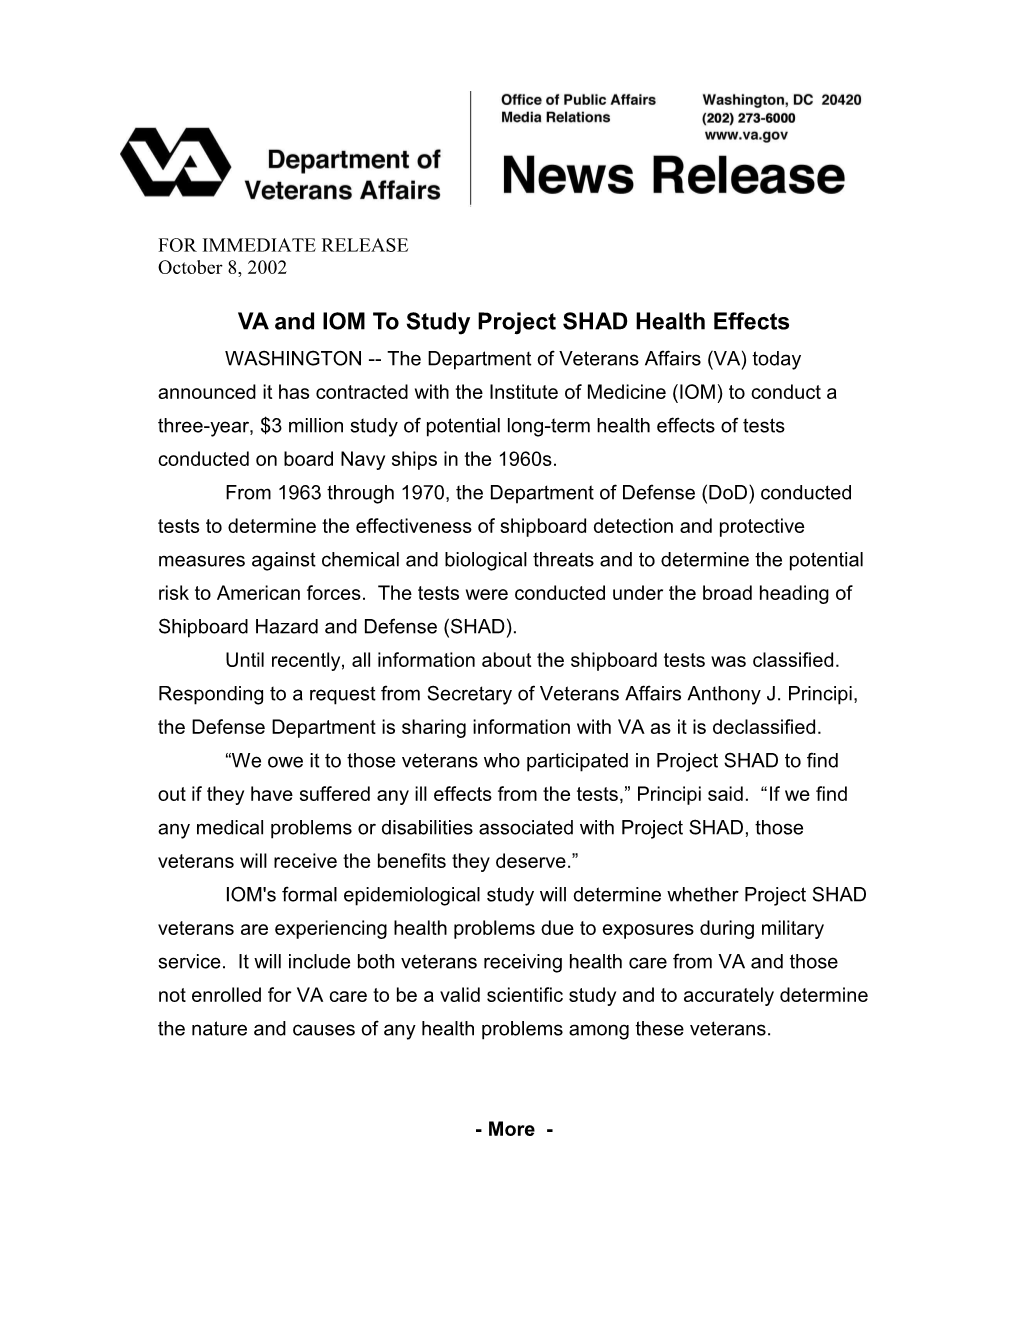 VA and IOM to Study Project SHAD Health Effects